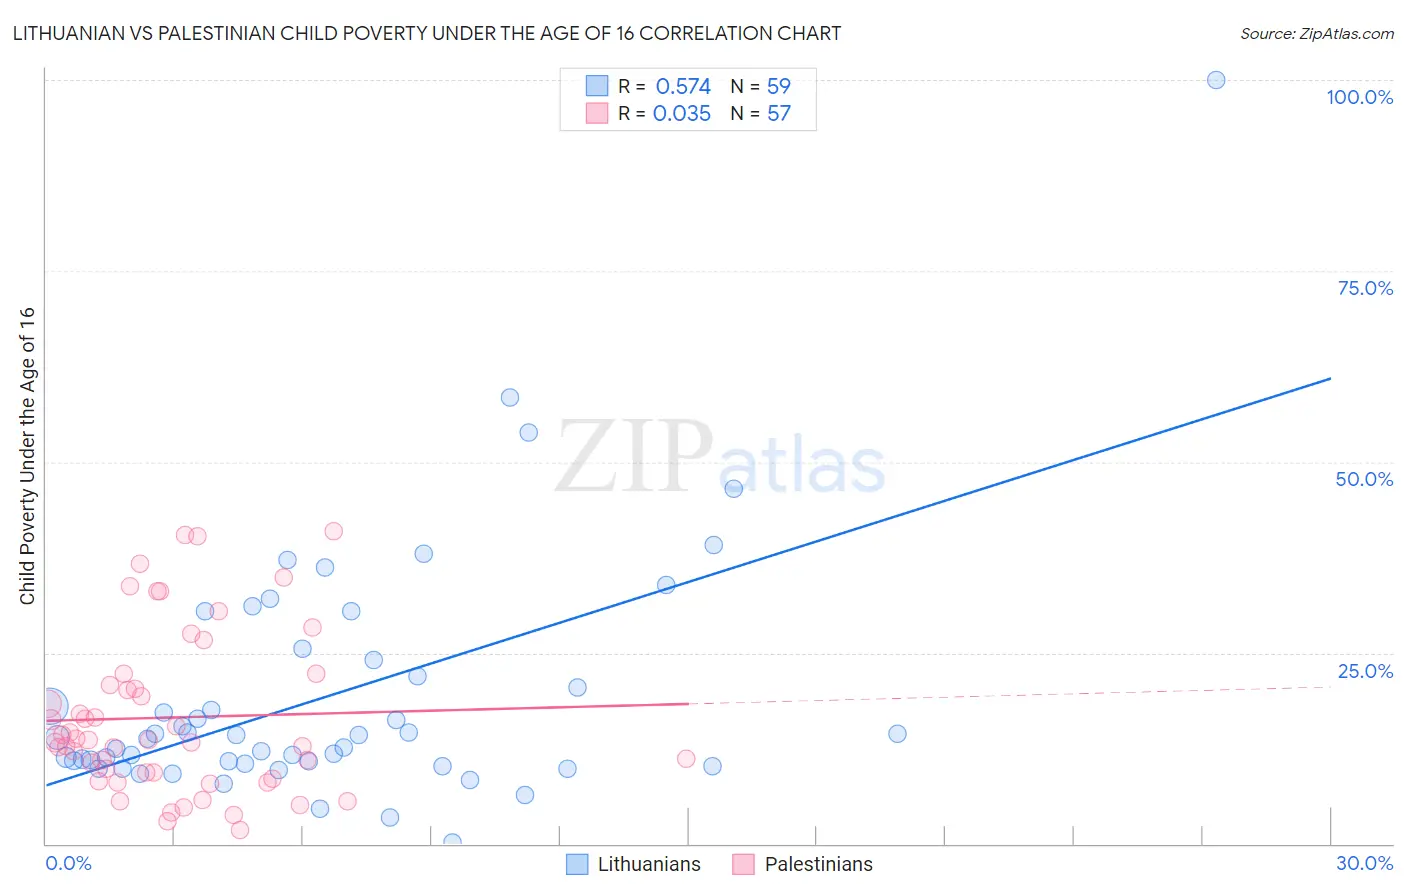 Lithuanian vs Palestinian Child Poverty Under the Age of 16